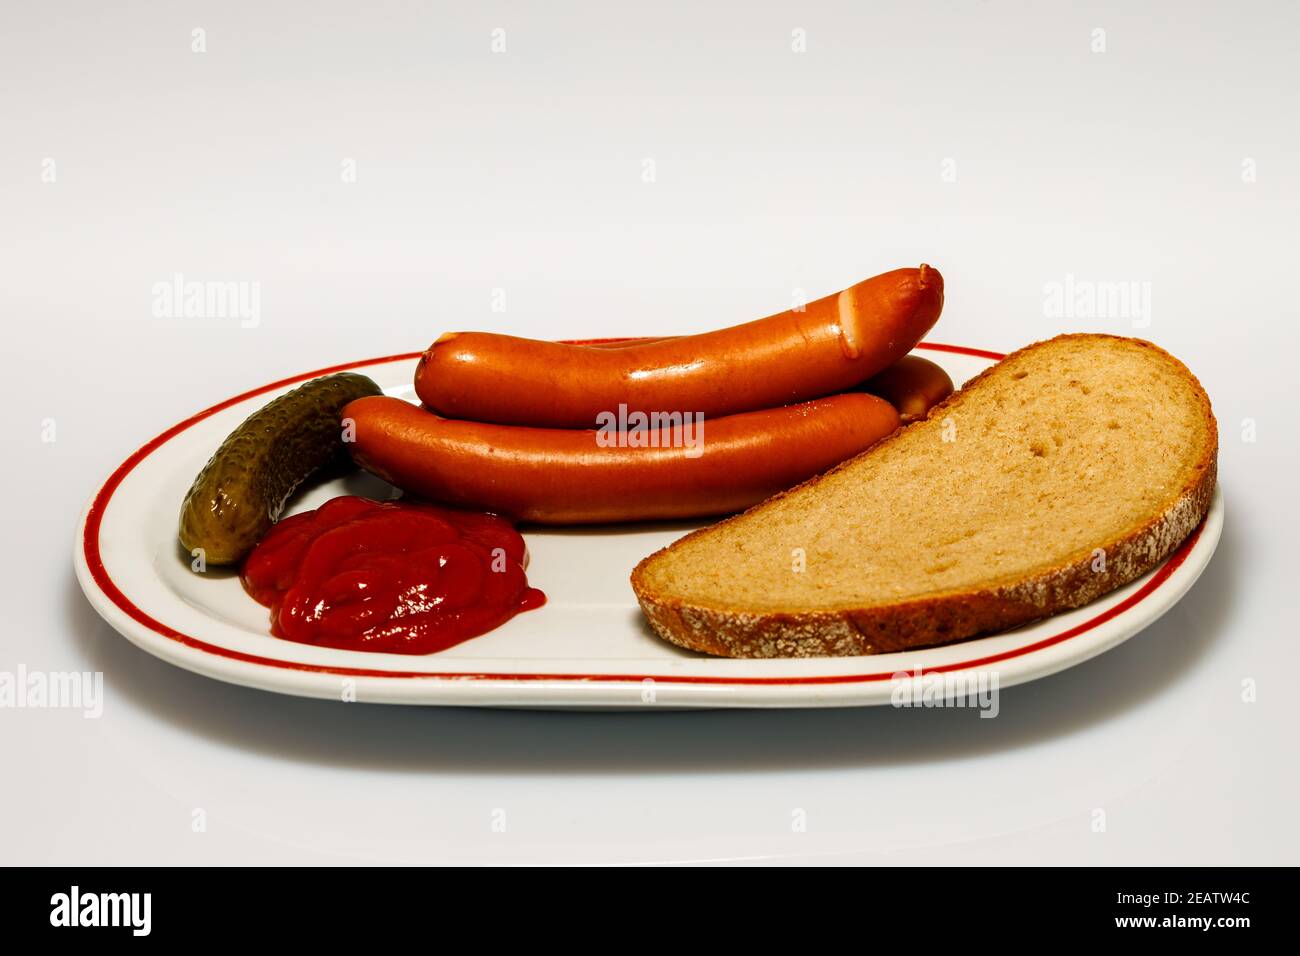 Frankfurter sausages with bread Stock Photo